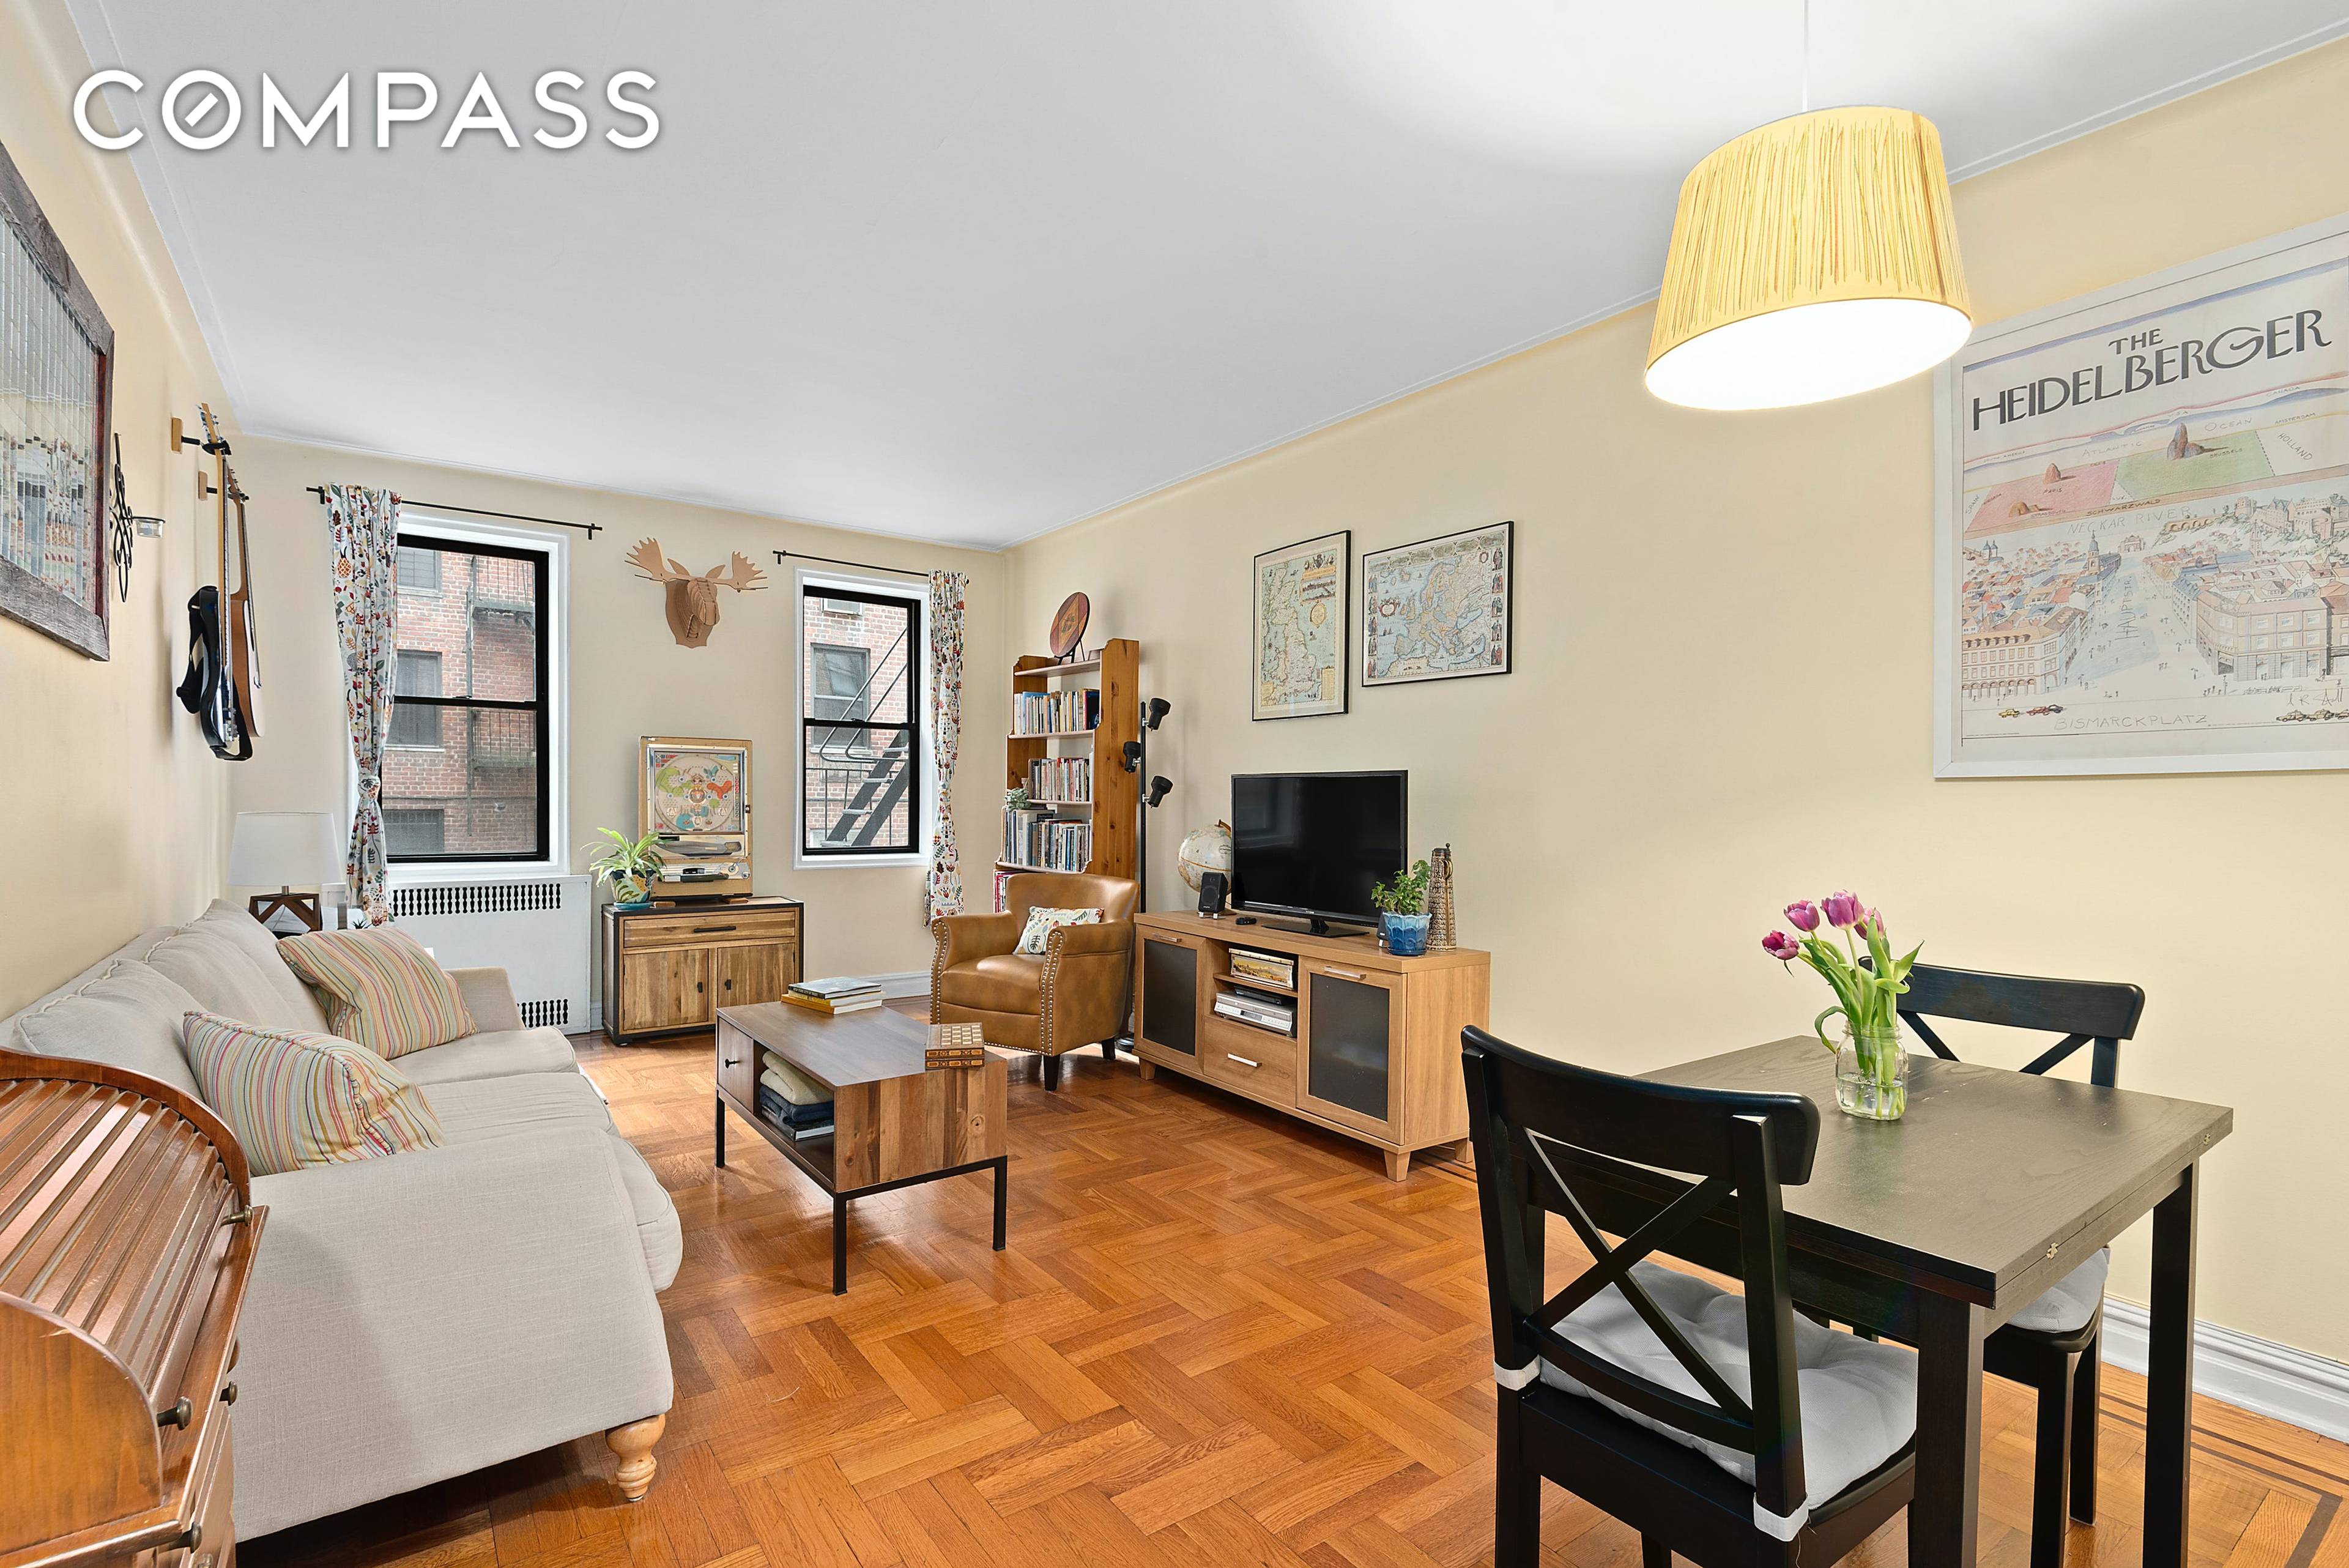 DITMAS PARK ! Large and spacious 1 bed 1 bath co op located in the heart of historic Ditmas Park.